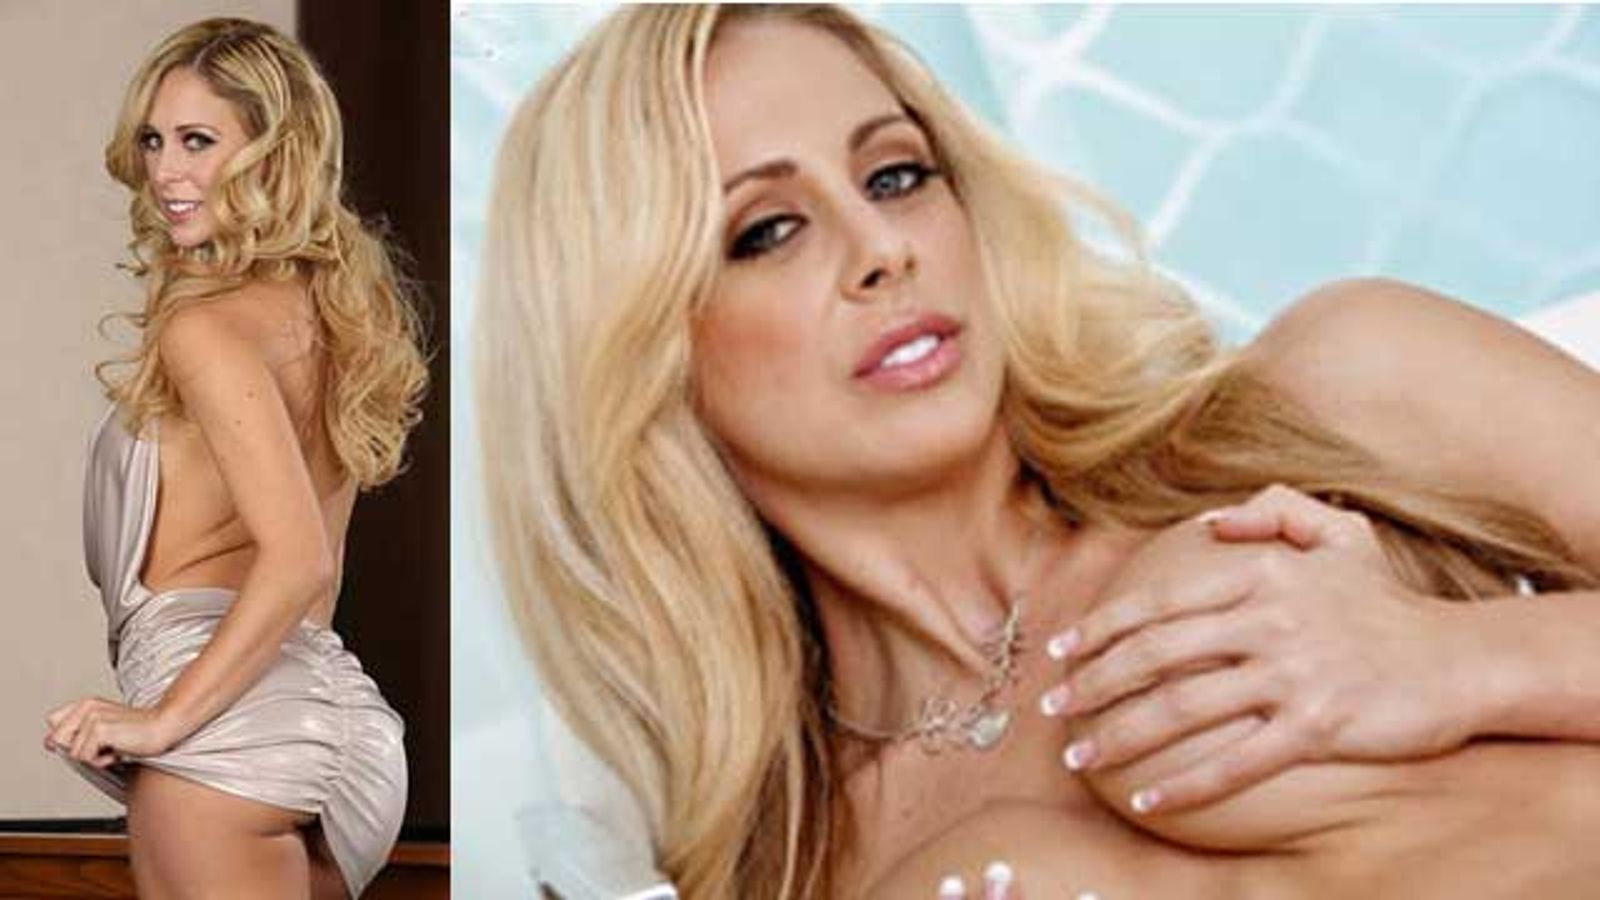 Cherie DeVille Arrives in LA This Week to Full House